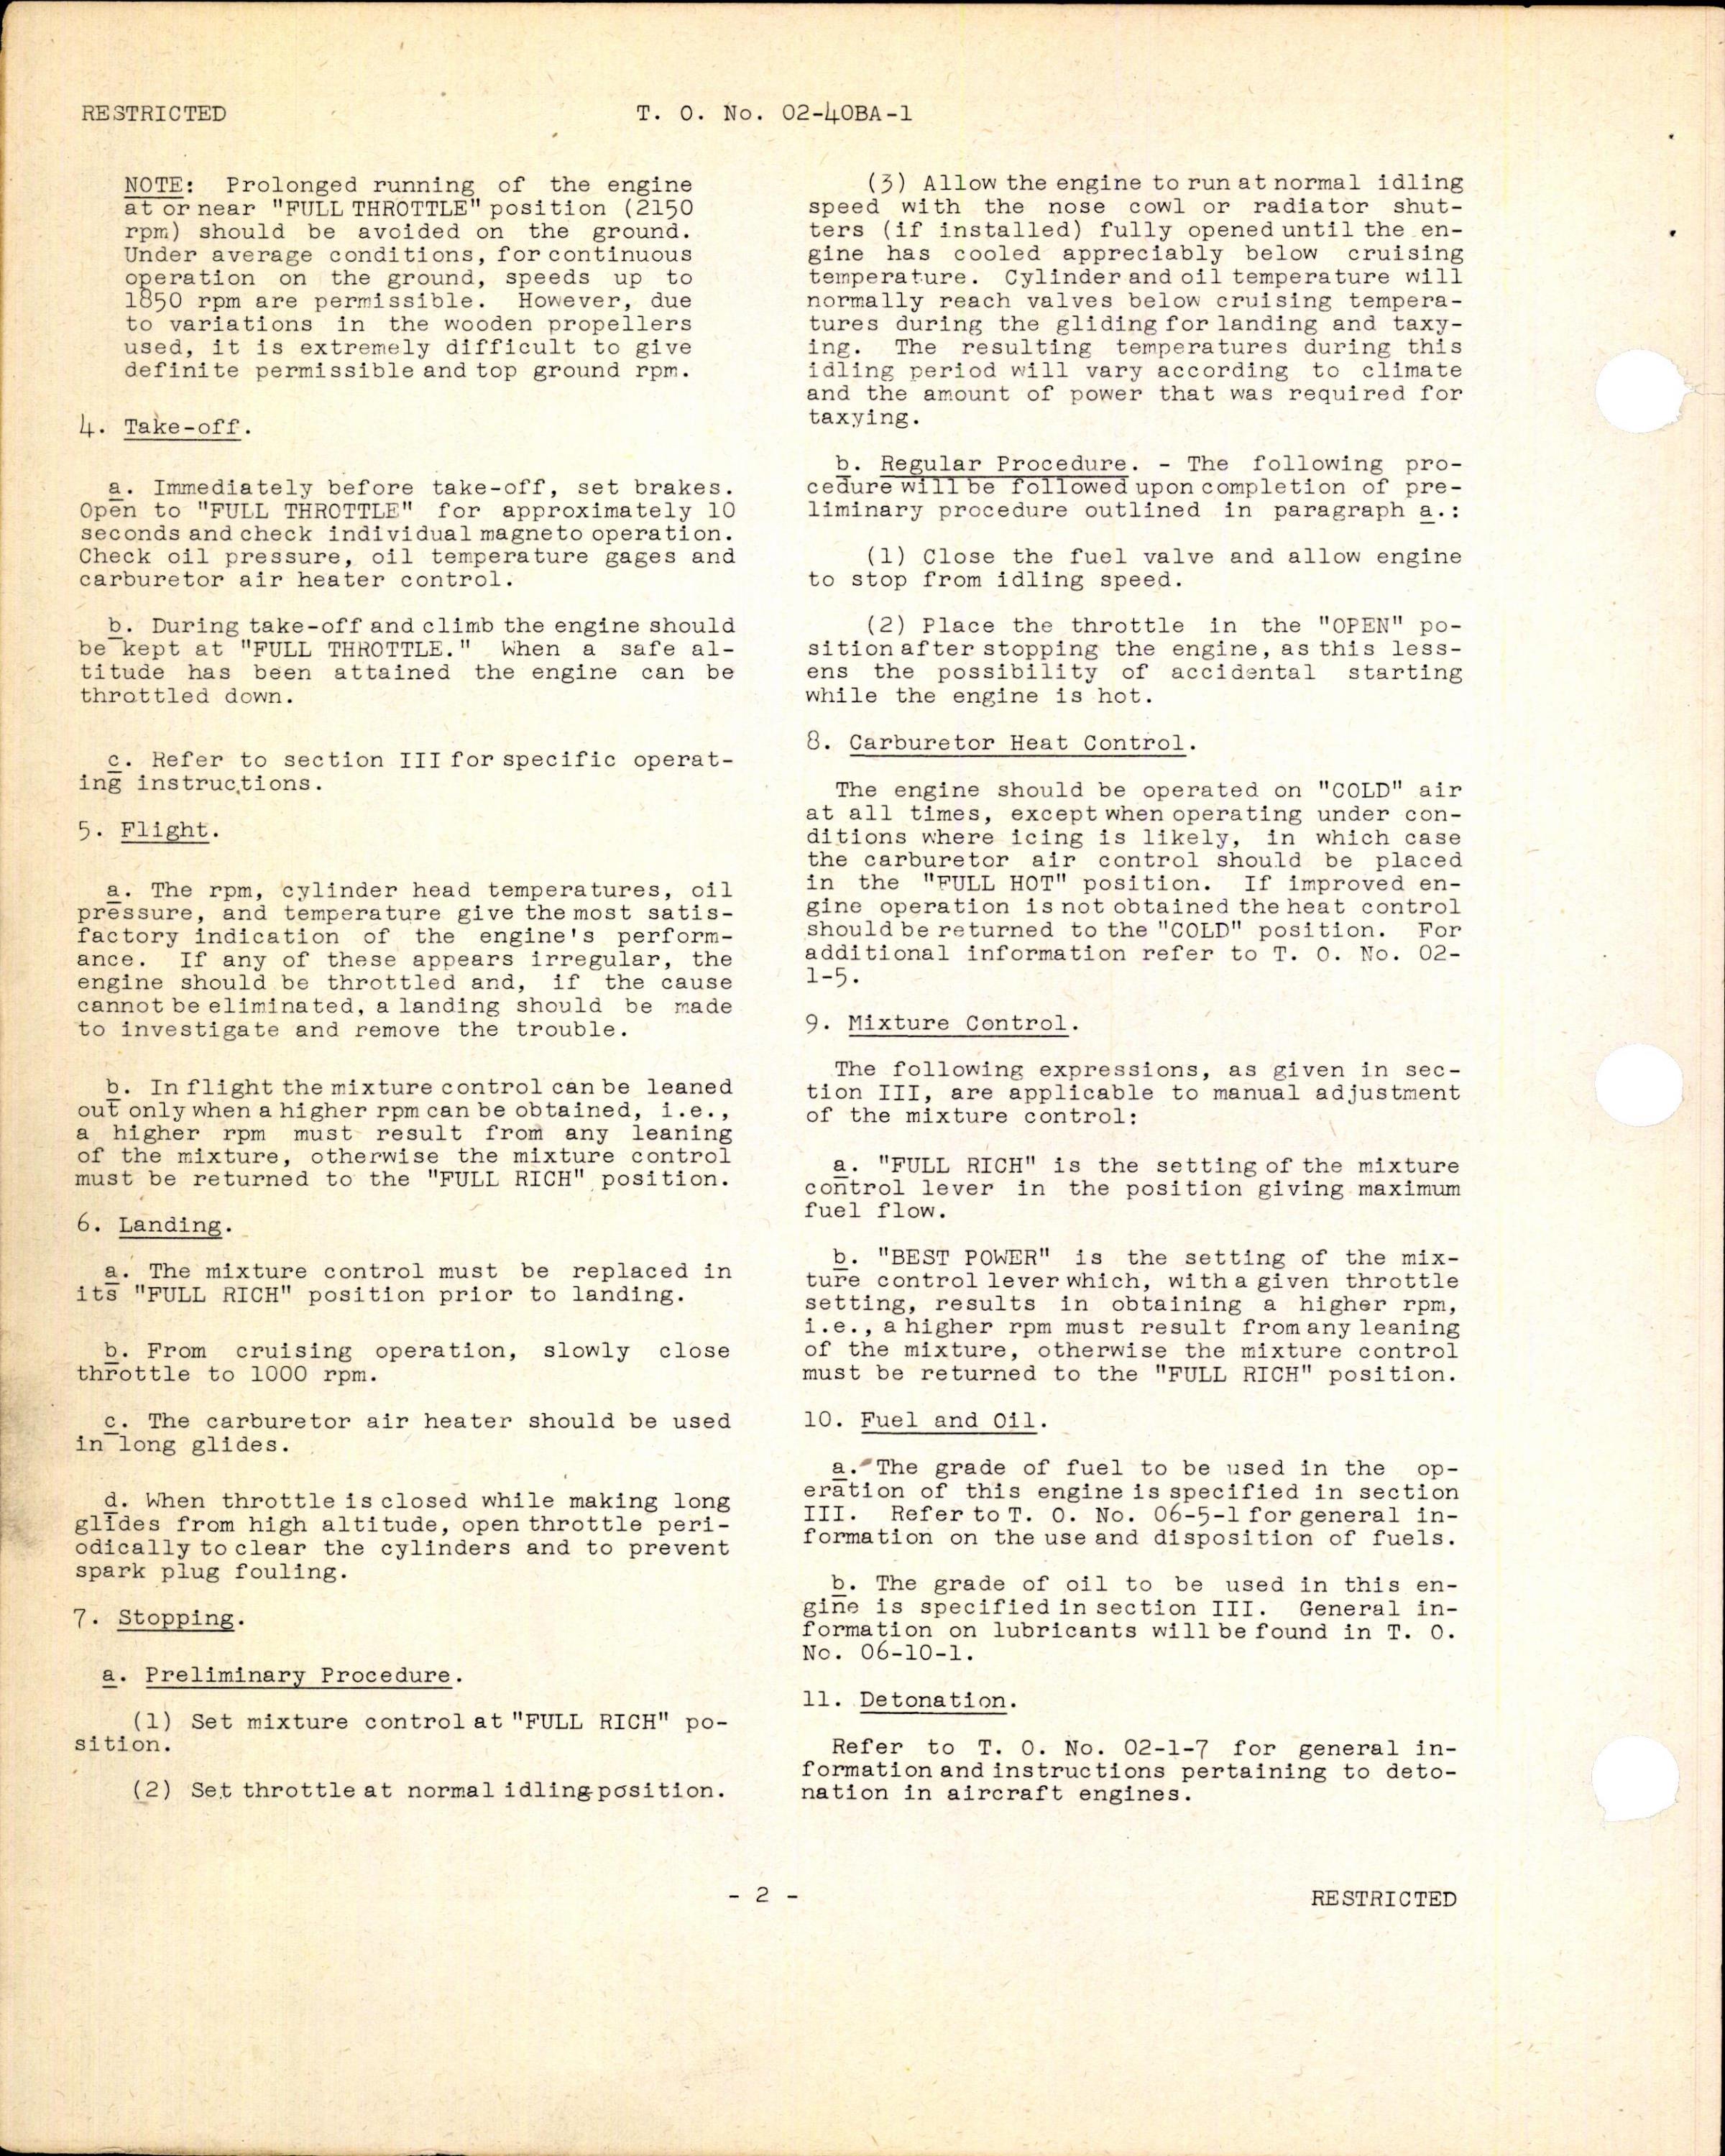 Sample page 6 from AirCorps Library document: Operation Instructions for 0-170-3 Aircraft Engine